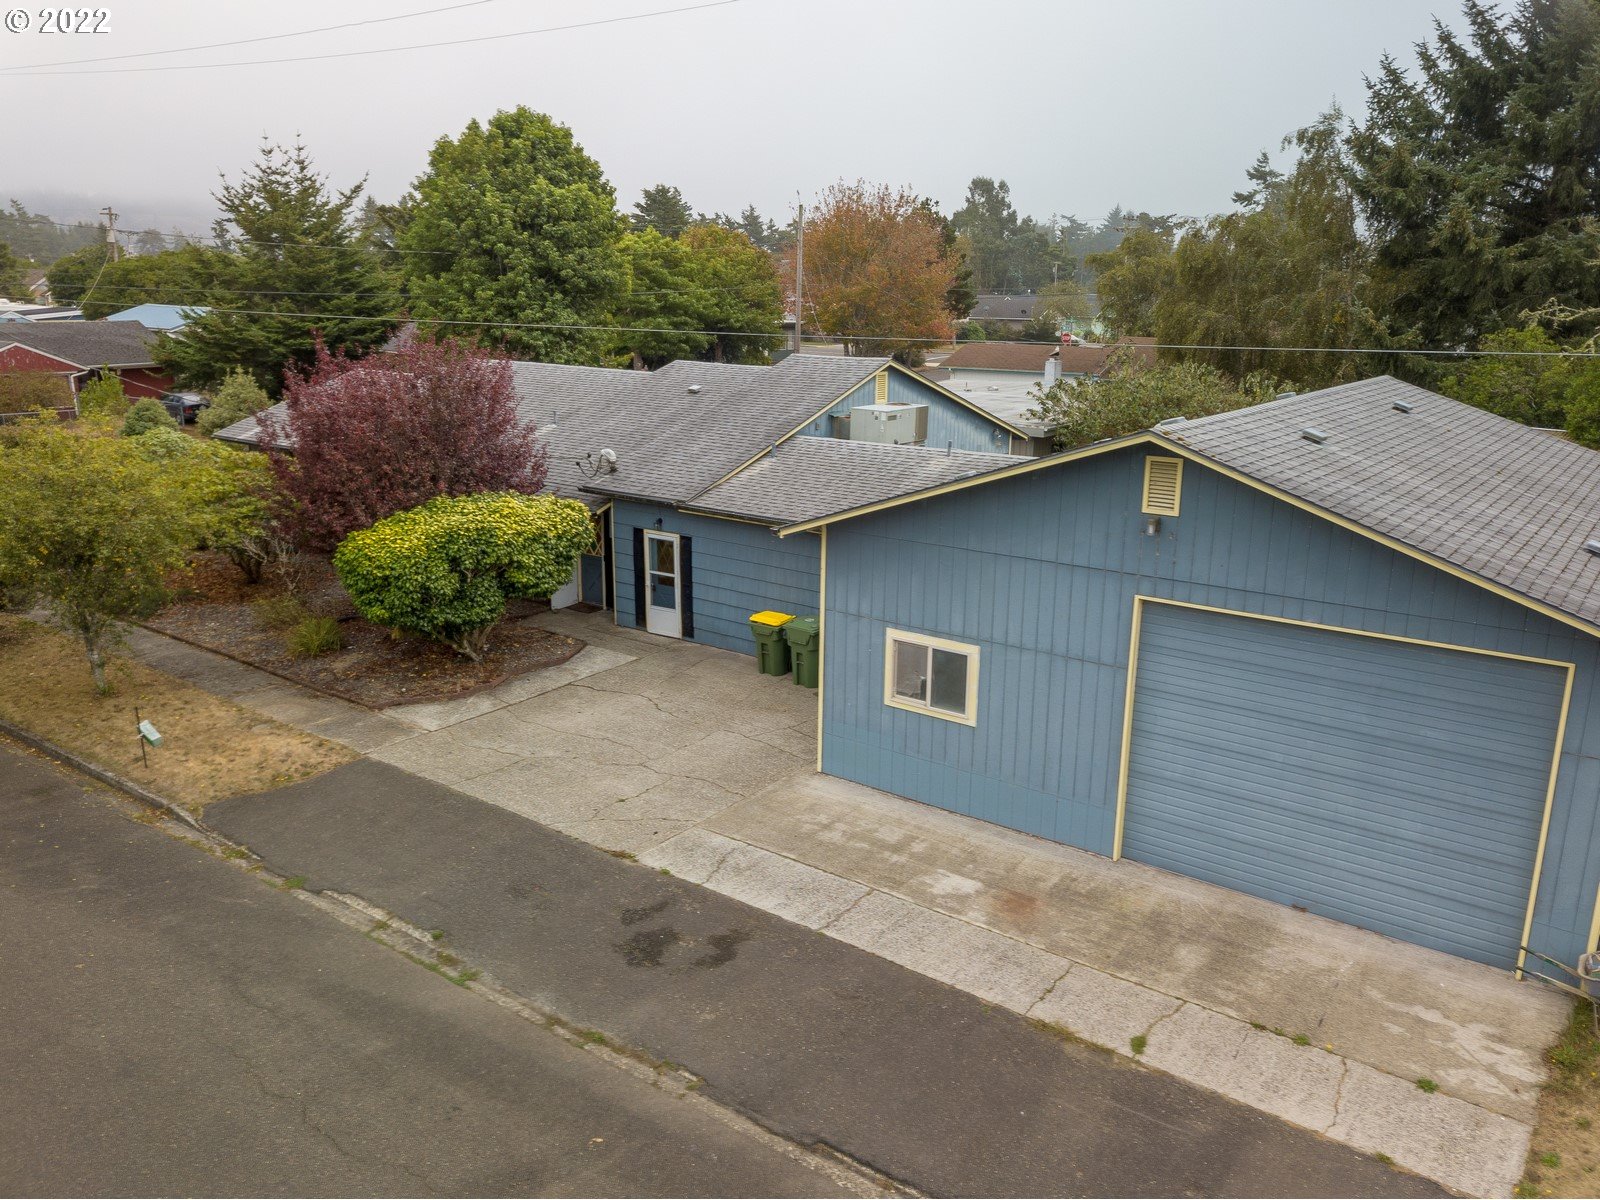 589 IVY ST, Florence, OR 